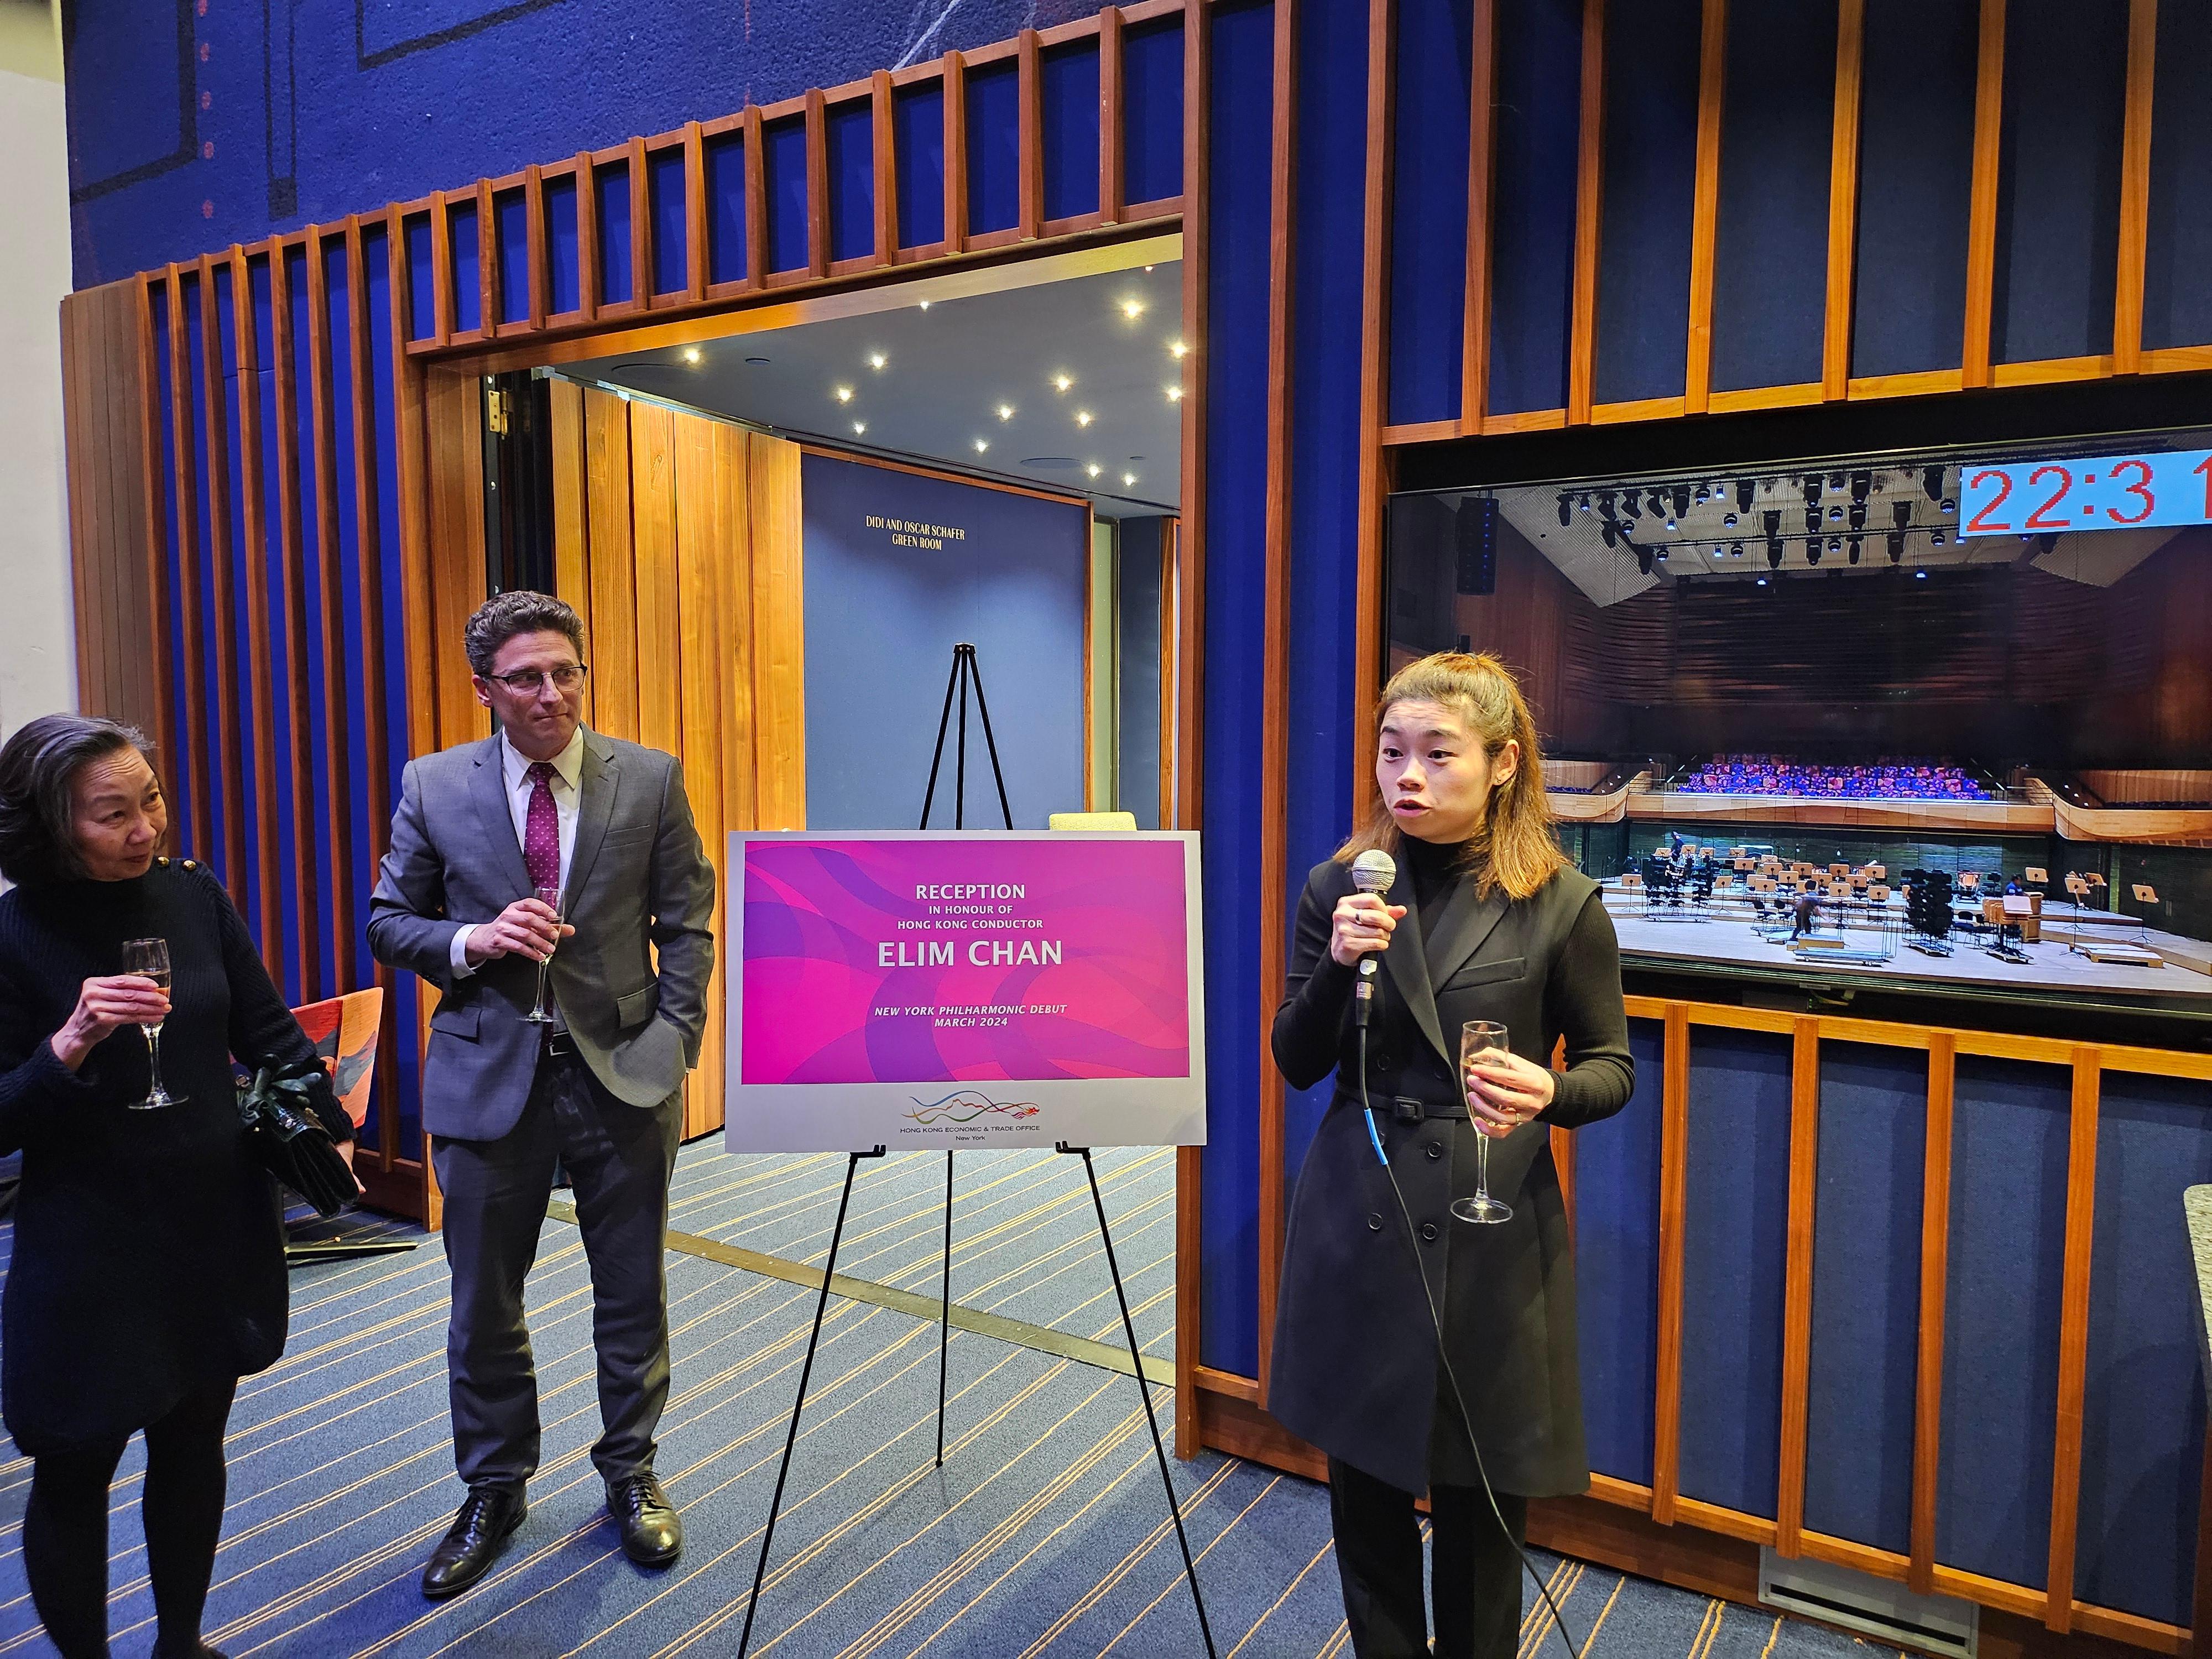 The Hong Kong Economic and Trade Office, New York hosted a celebratory cocktail reception for Hong Kong conductor Elim Chan at her debut with the New York Philharmonic at David Geffen Hall, Lincoln Centre on March 8 (New York time). Photo shows Elim Chan (right) delivering remarks.